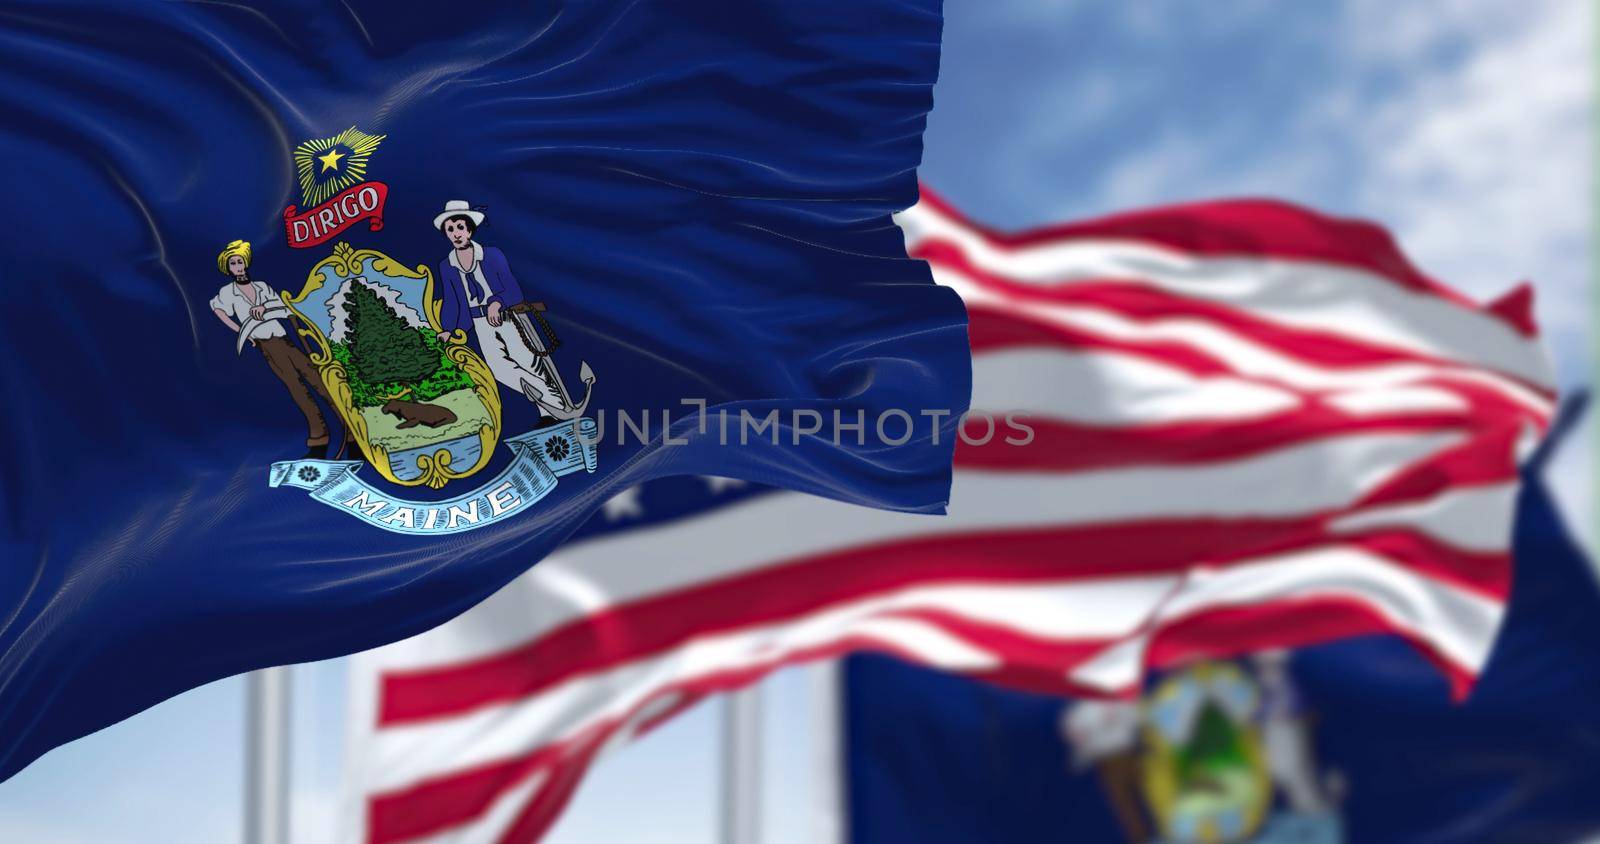 The Maine state flag waving along with the national flag of the United States of America by rarrarorro